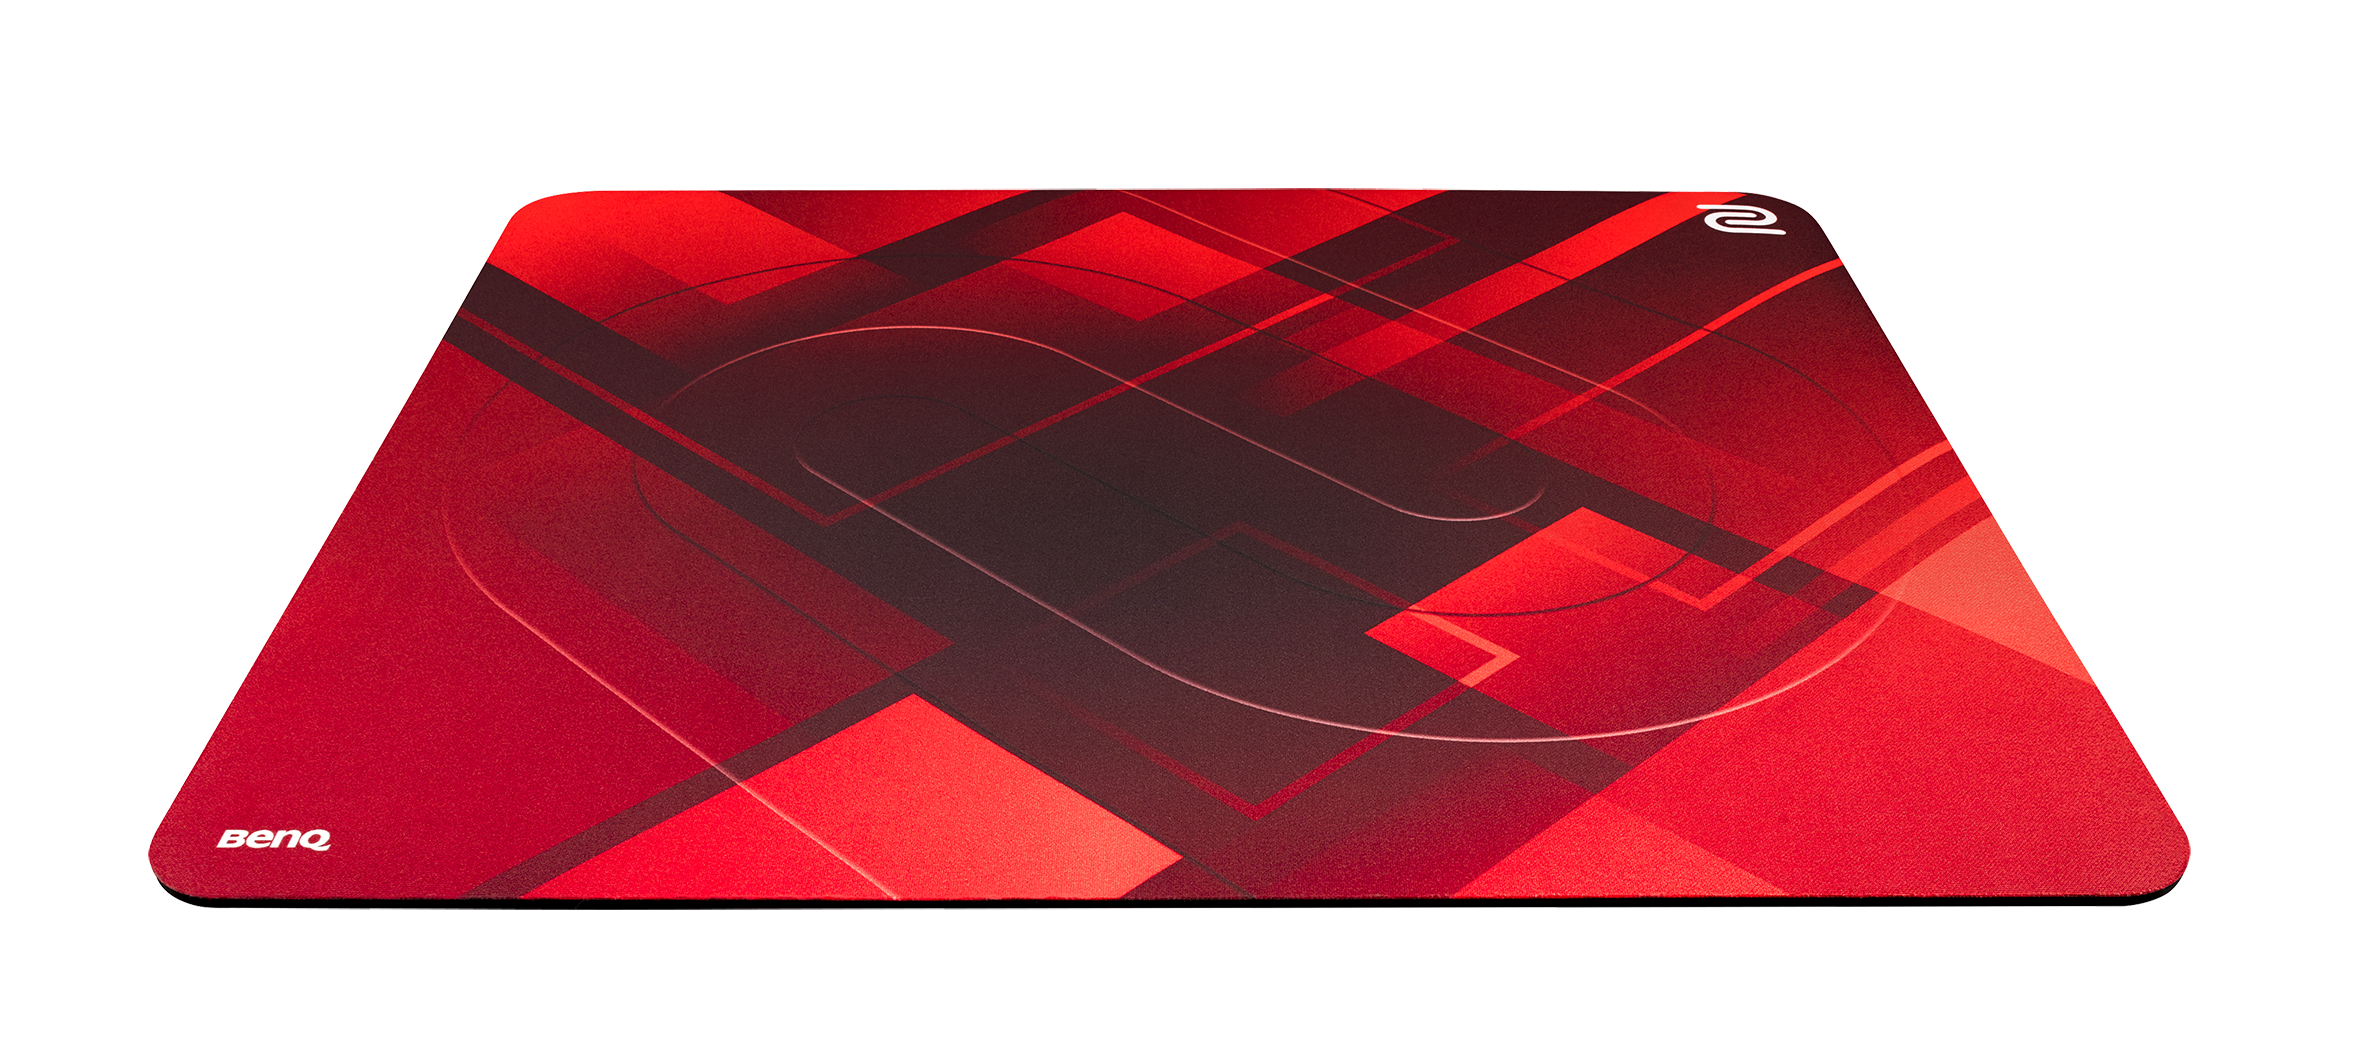 G-SR-SE - Gaming Mousepad for eSports | ZOWIE US